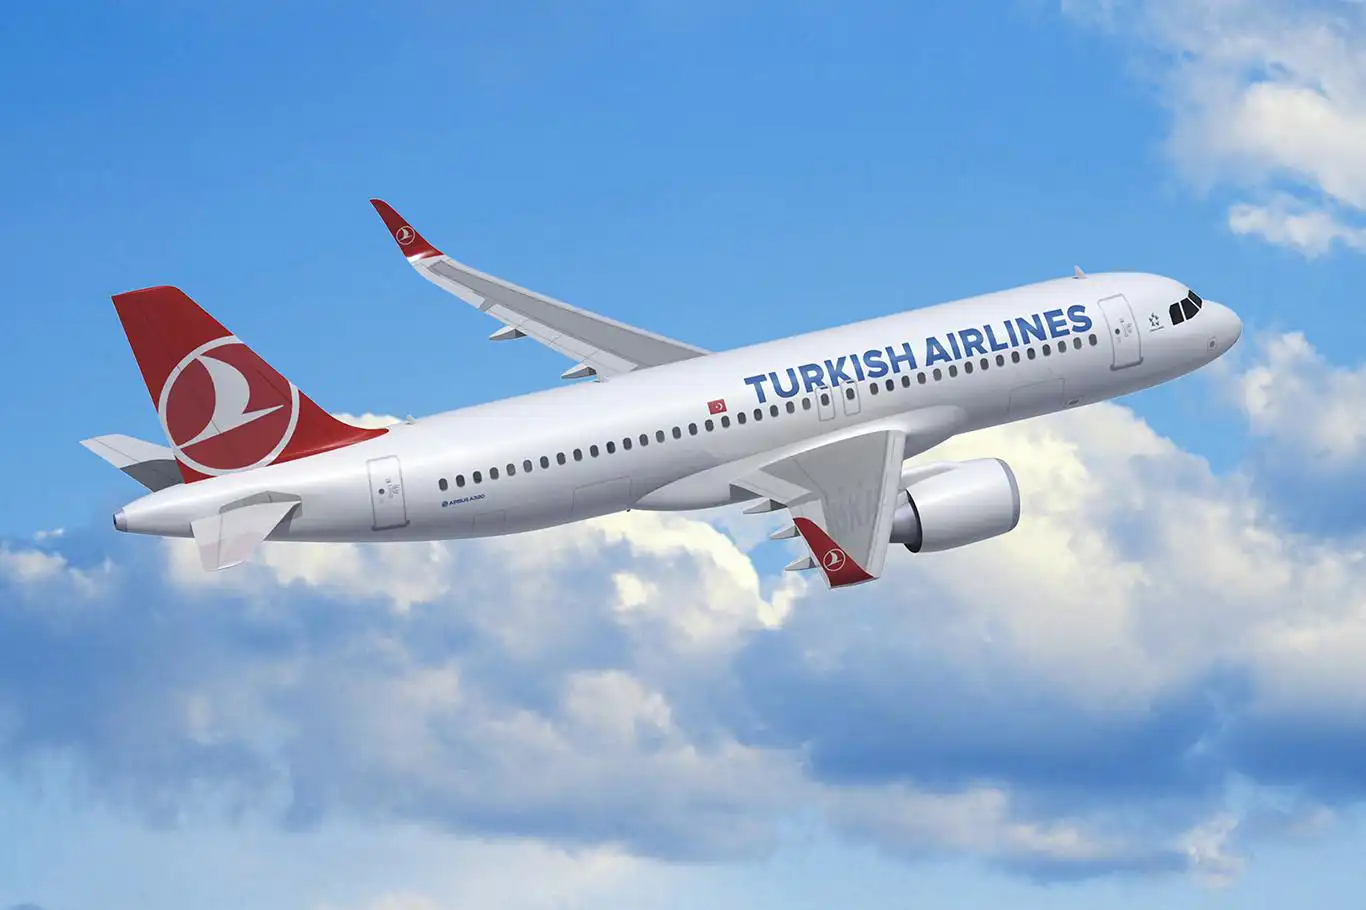 Turkish Airlines to resume flights to Libya after 10-year hiatus